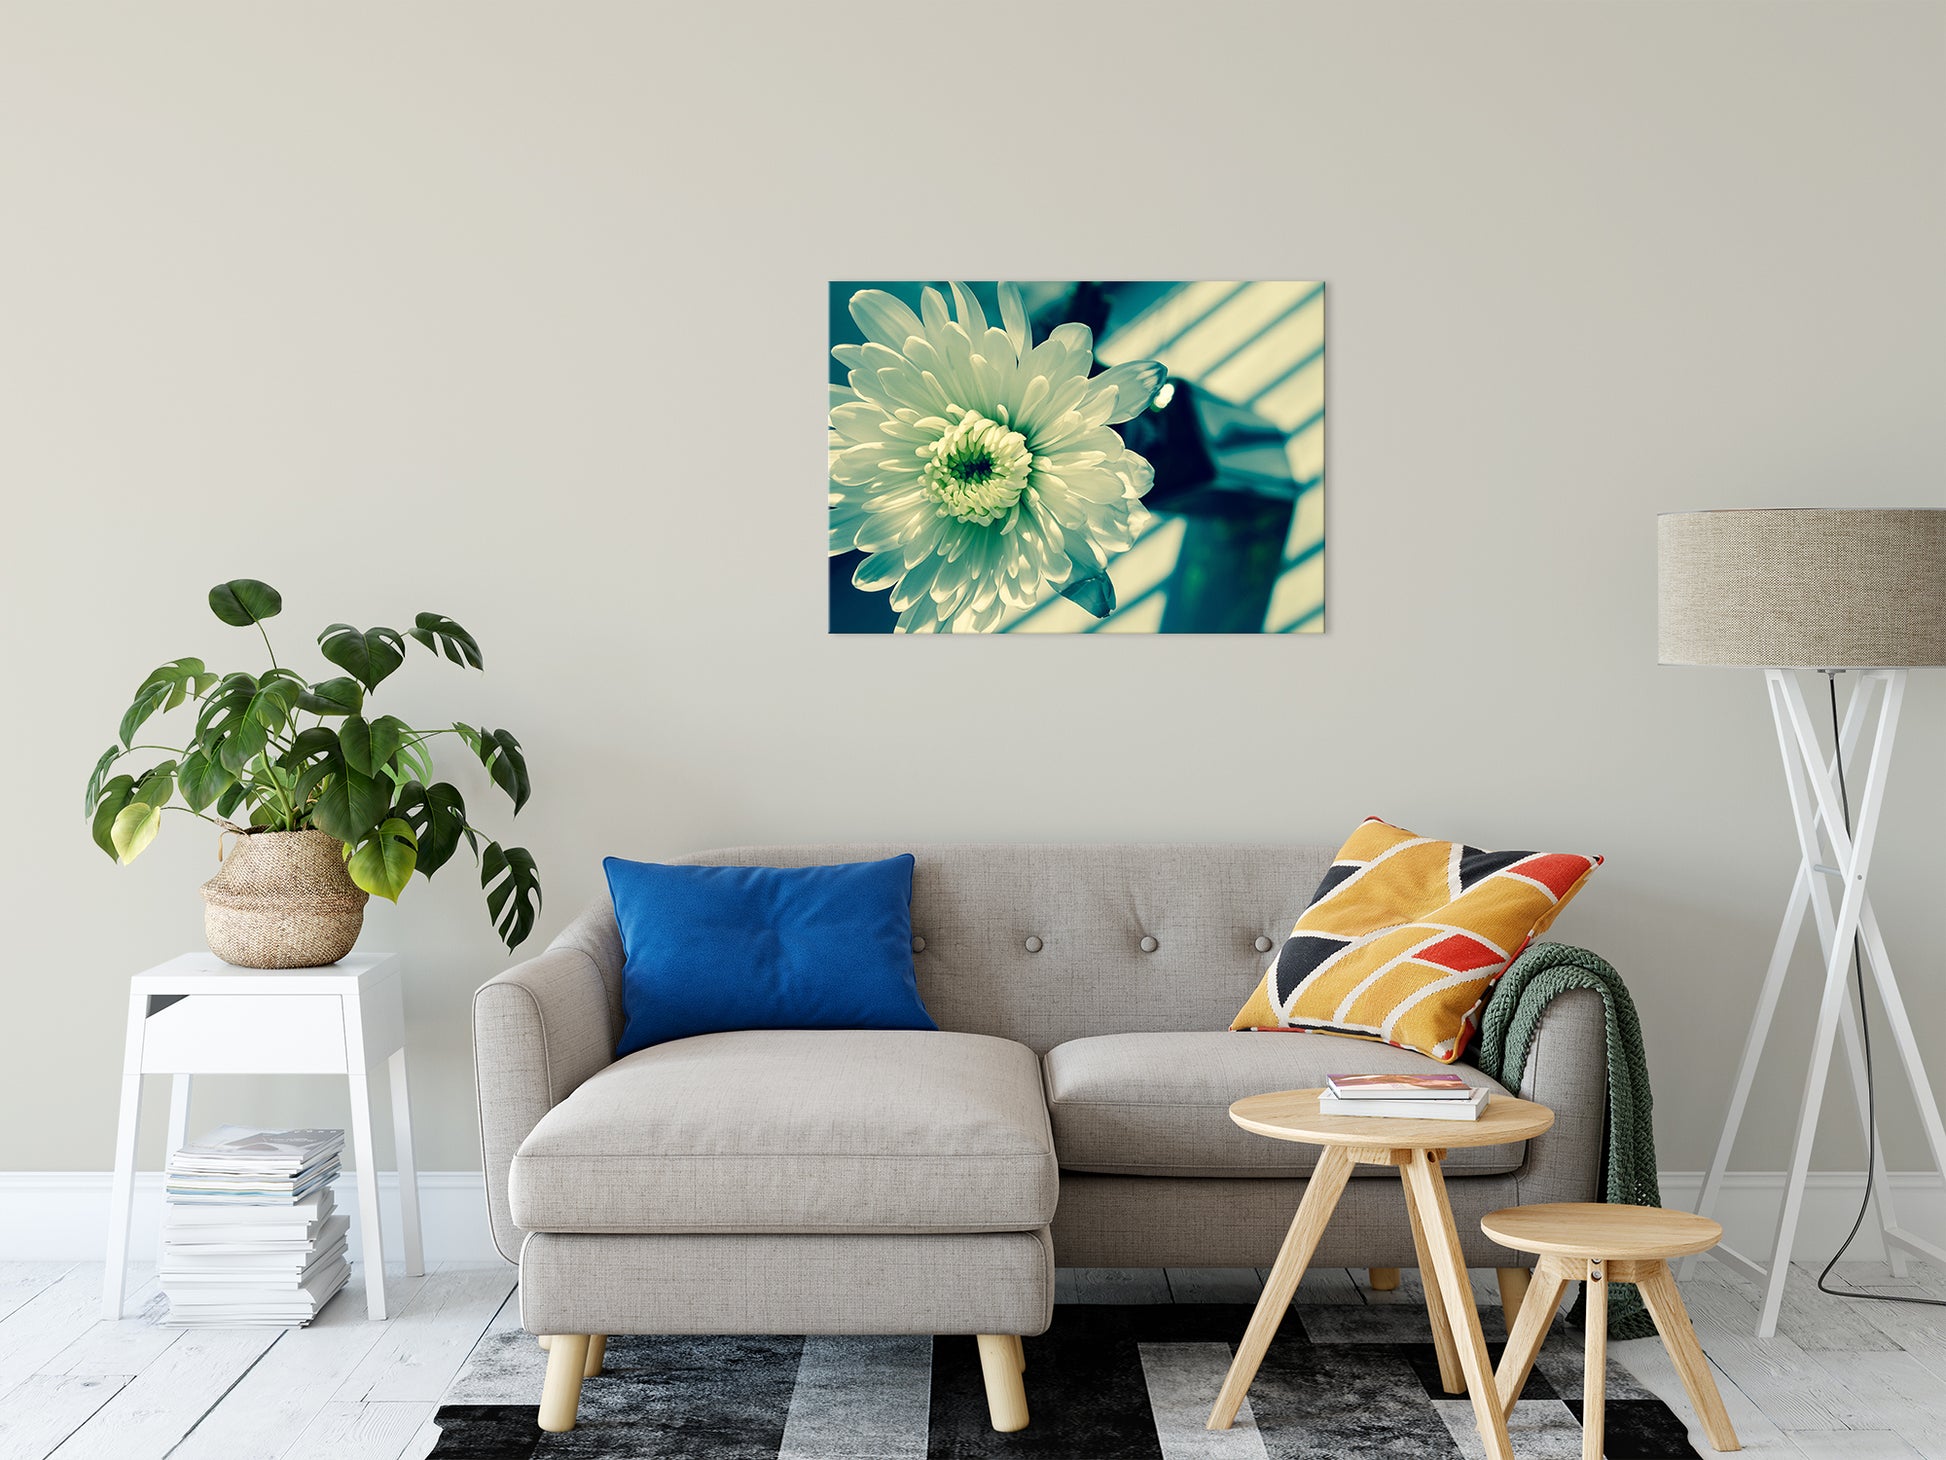 Melancholy Flower Nature / Floral Photo Fine Art Canvas Wall Art Prints 24" x 36" - PIPAFINEART